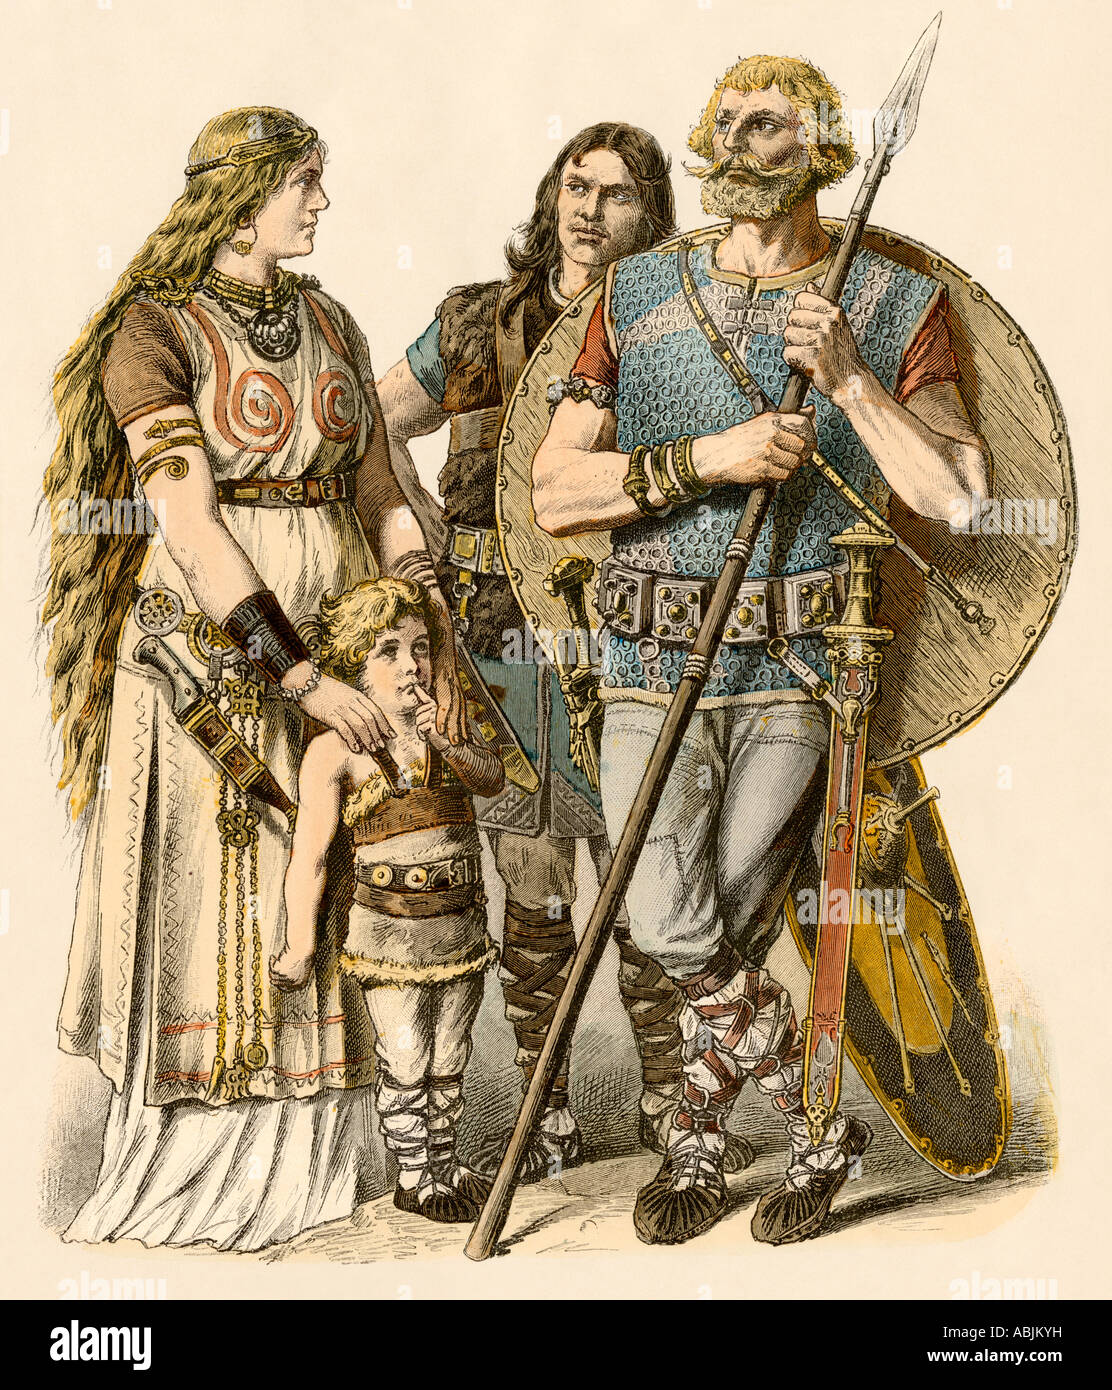 Europeans of the early Middle Ages. Hand-colored print Stock Photo